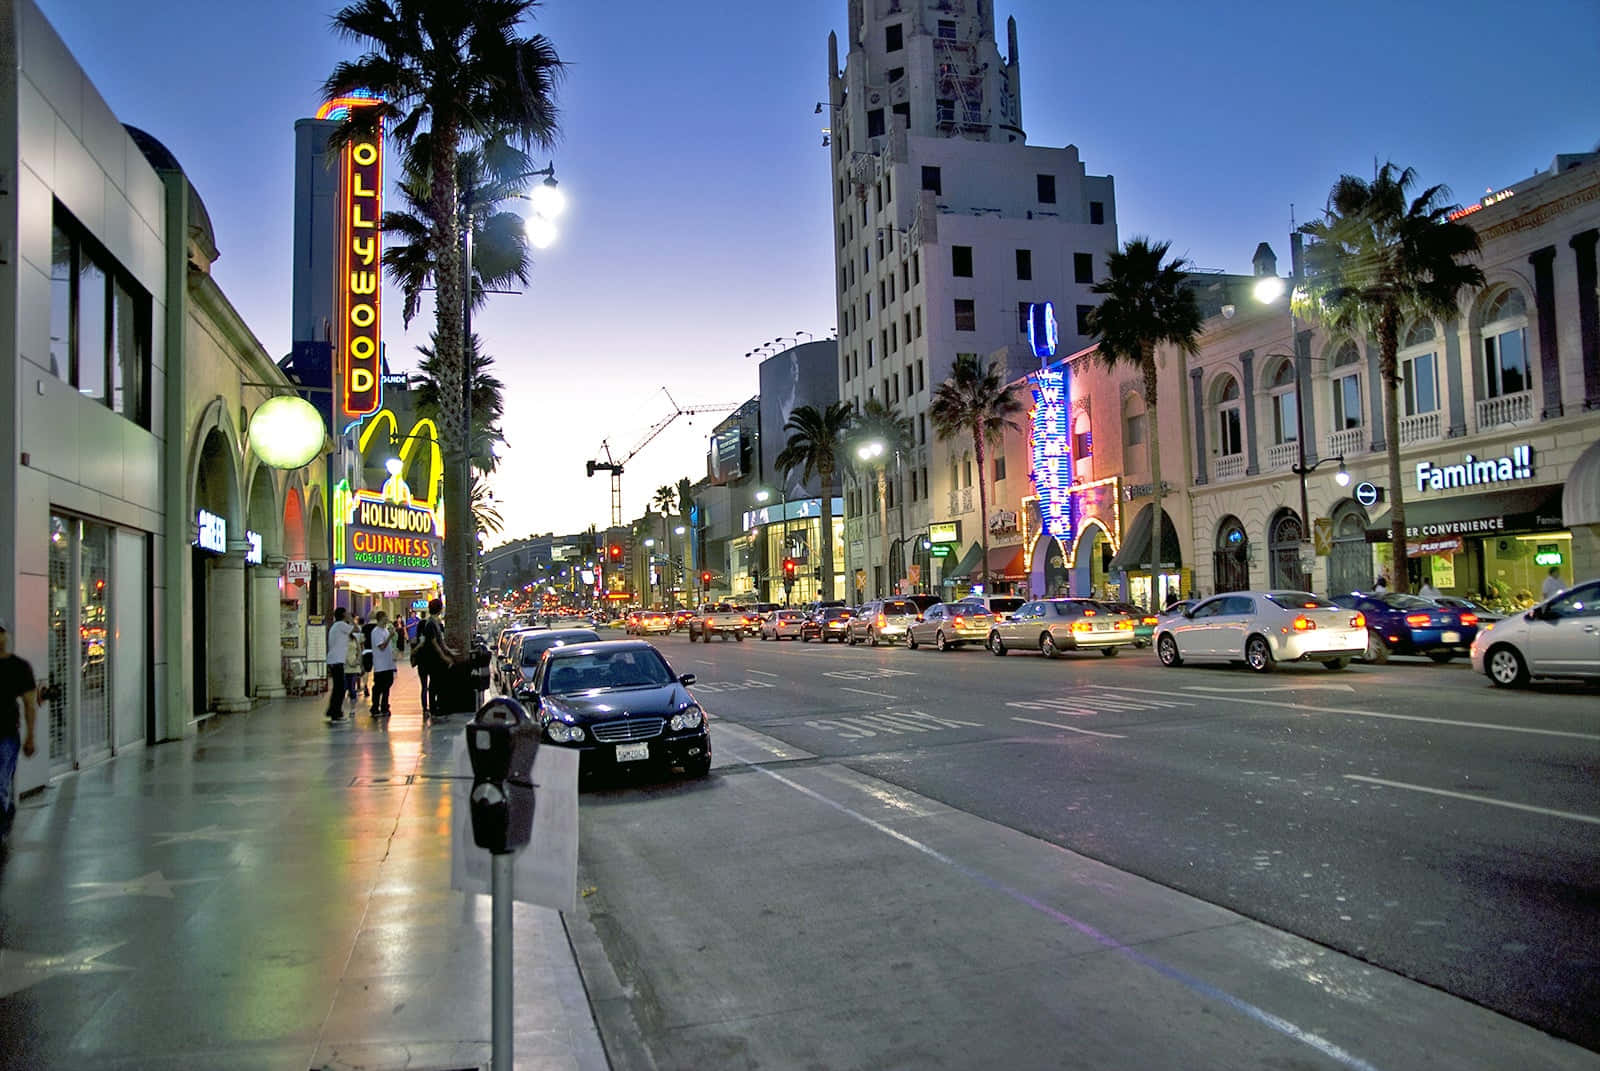 Hollywood Pictures